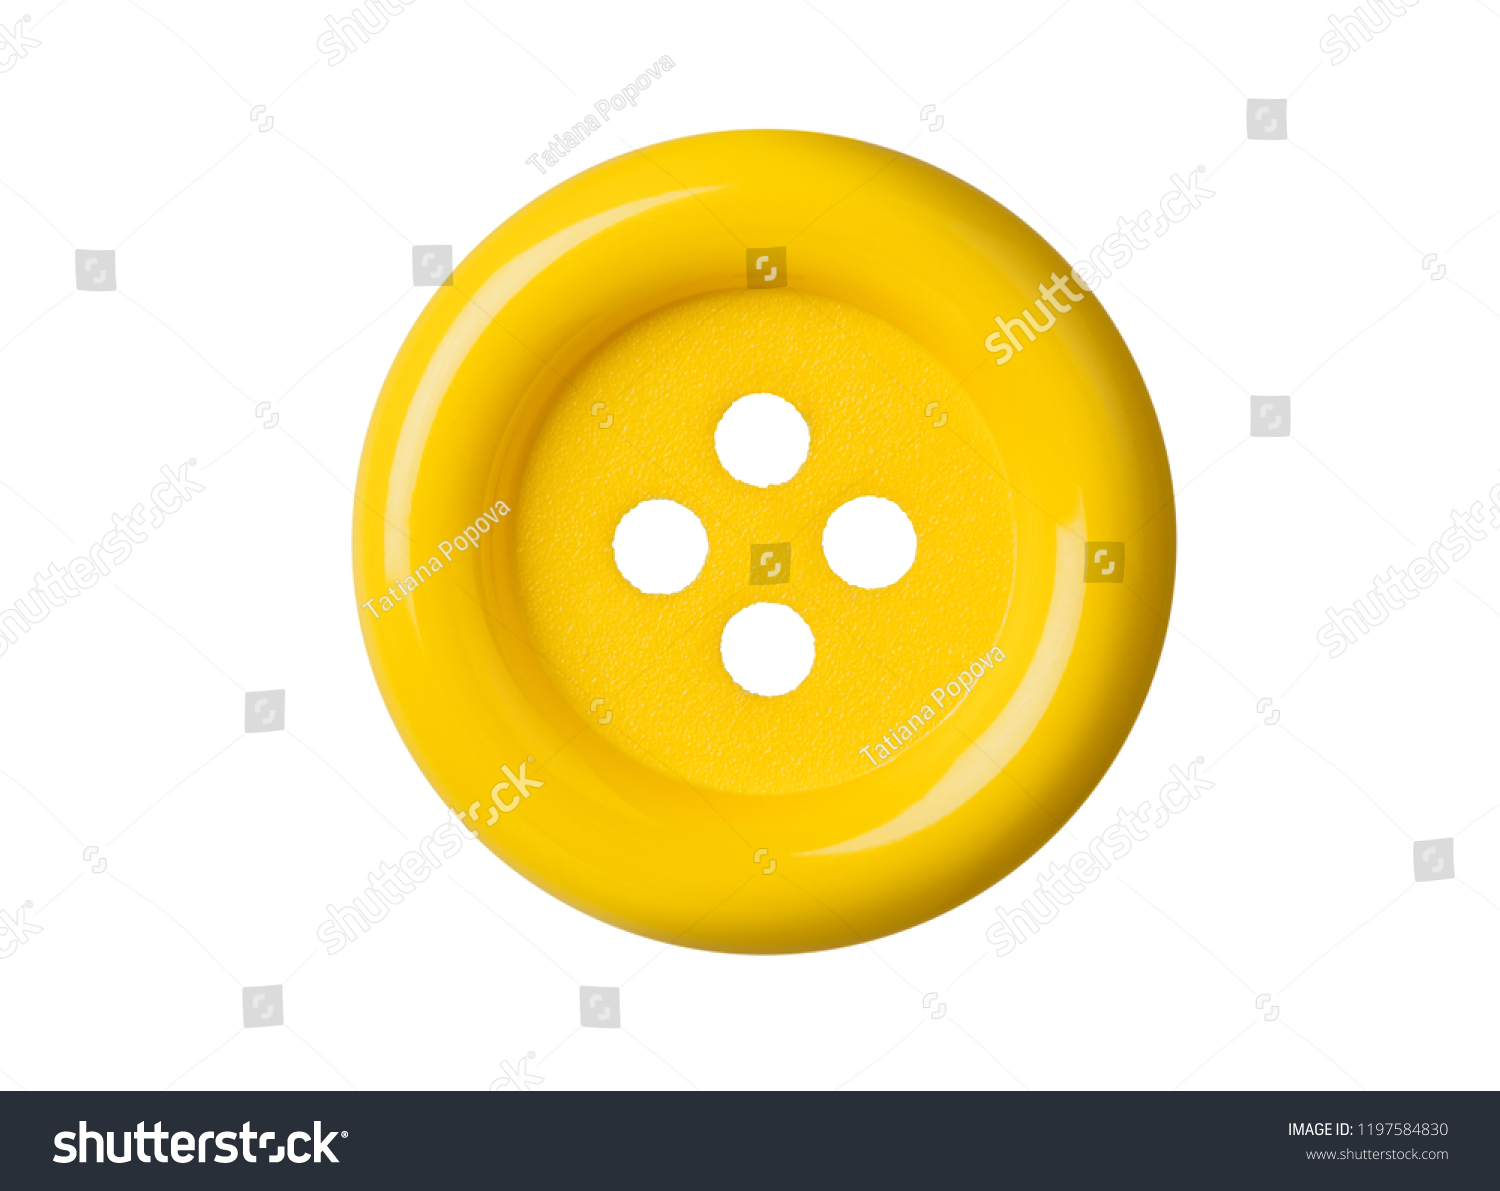 Yellow button isolated on white background #1197584830